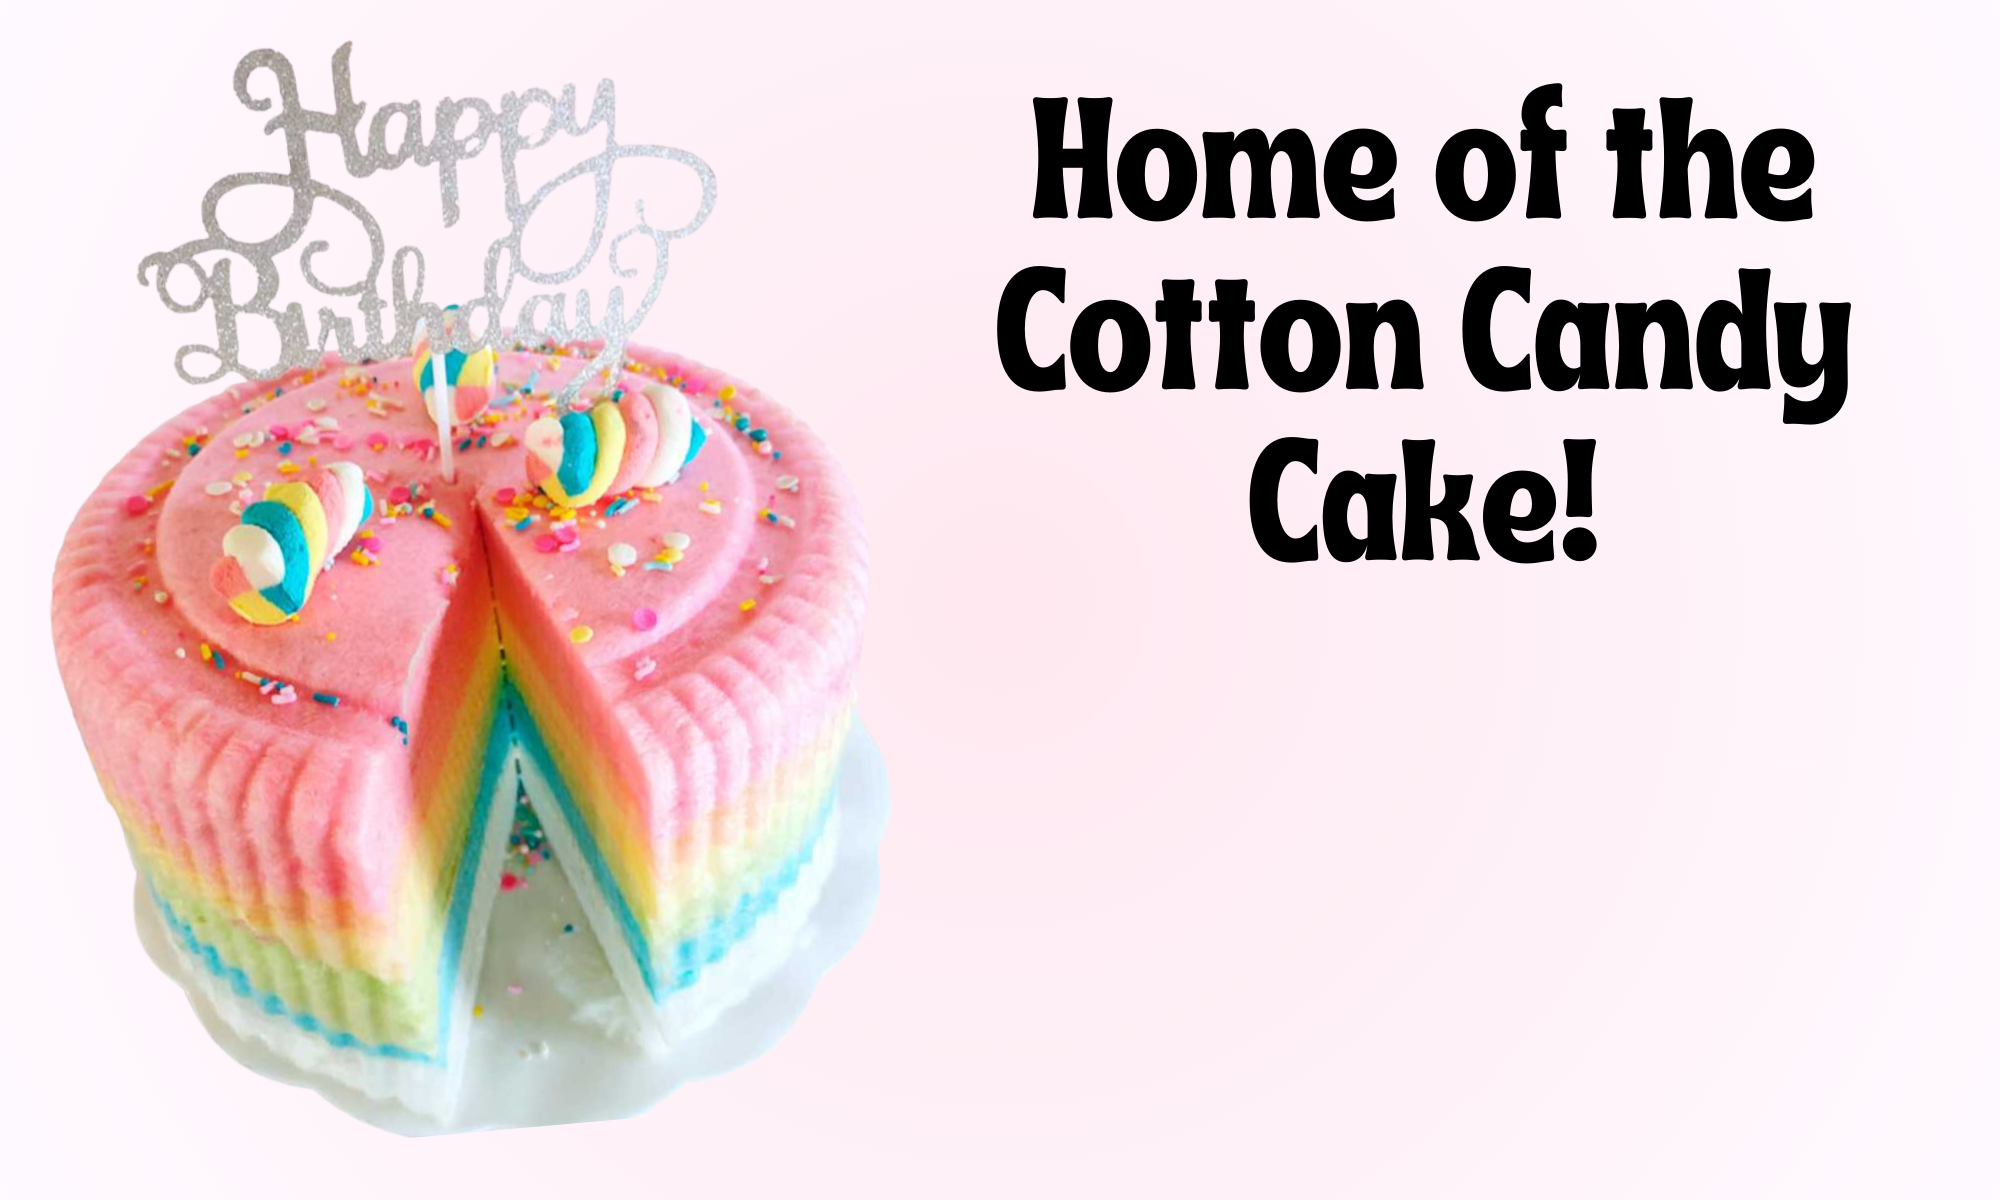 Home of the cotton candy cake! Floof cotton candy cakes are no match for cotton candy cake shop! This is the best way to serve cotton candy at your birthday party or event, without the hassle of a messy cotton candy machine! 